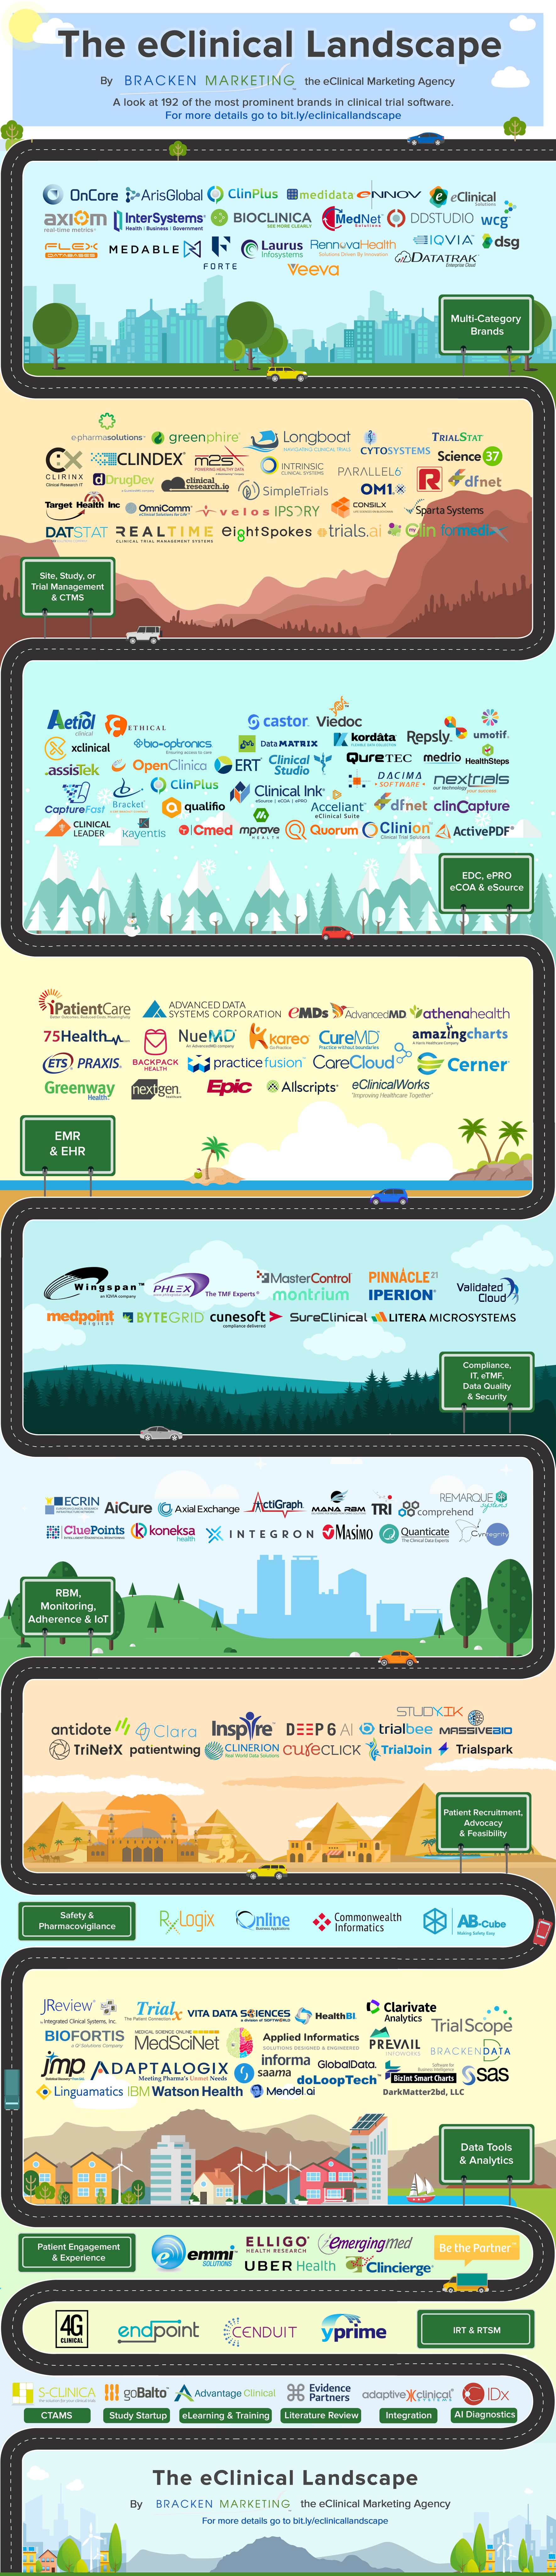 the eClinical Landscape by Bracken Marketing-1.png